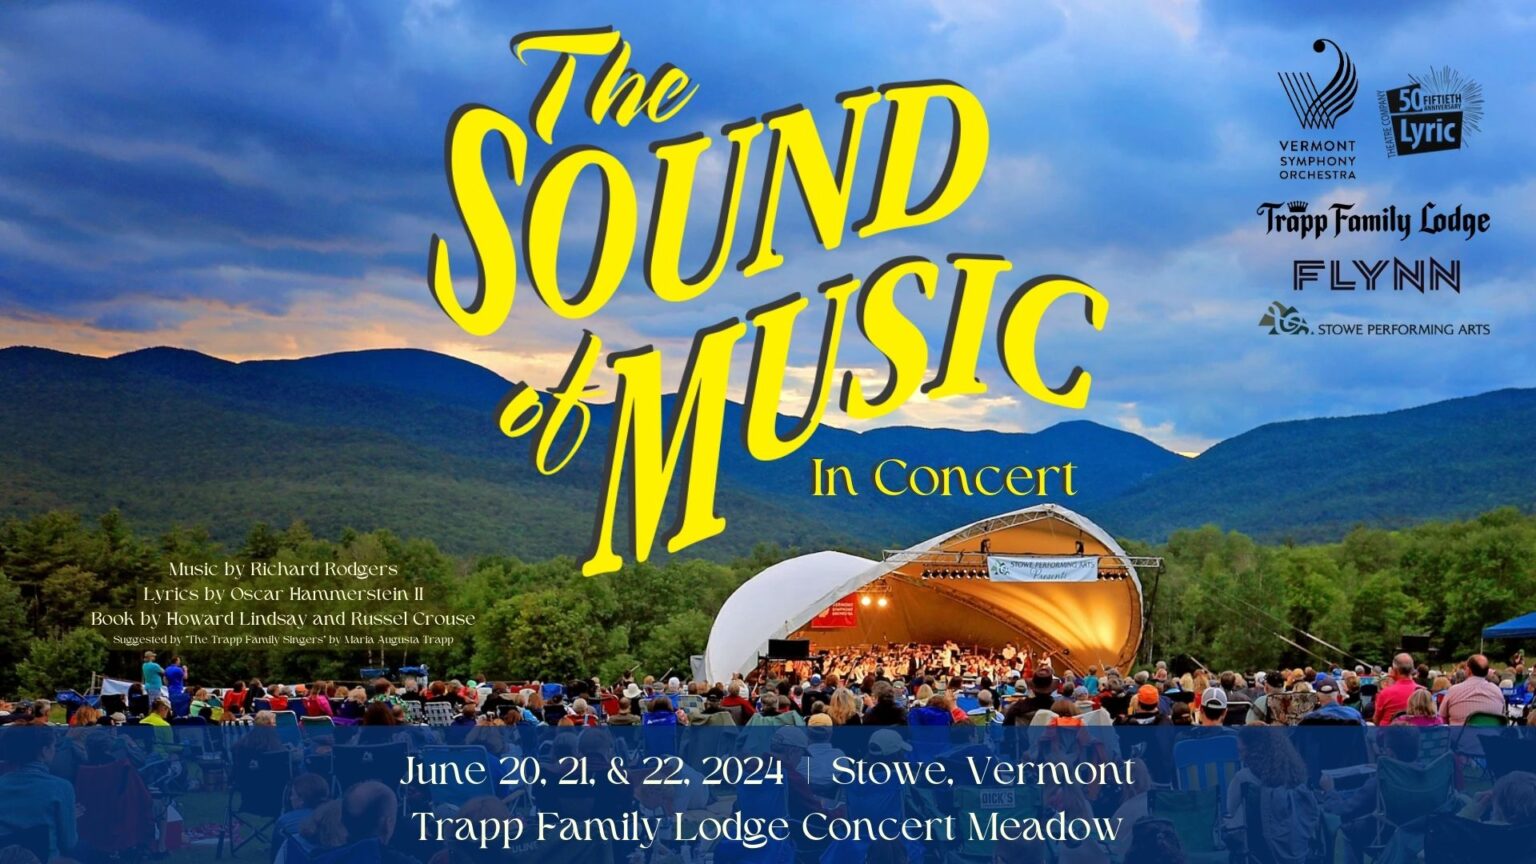 Events from June 20, 2024 June 22, 2024 › Sound of Music › Vermont